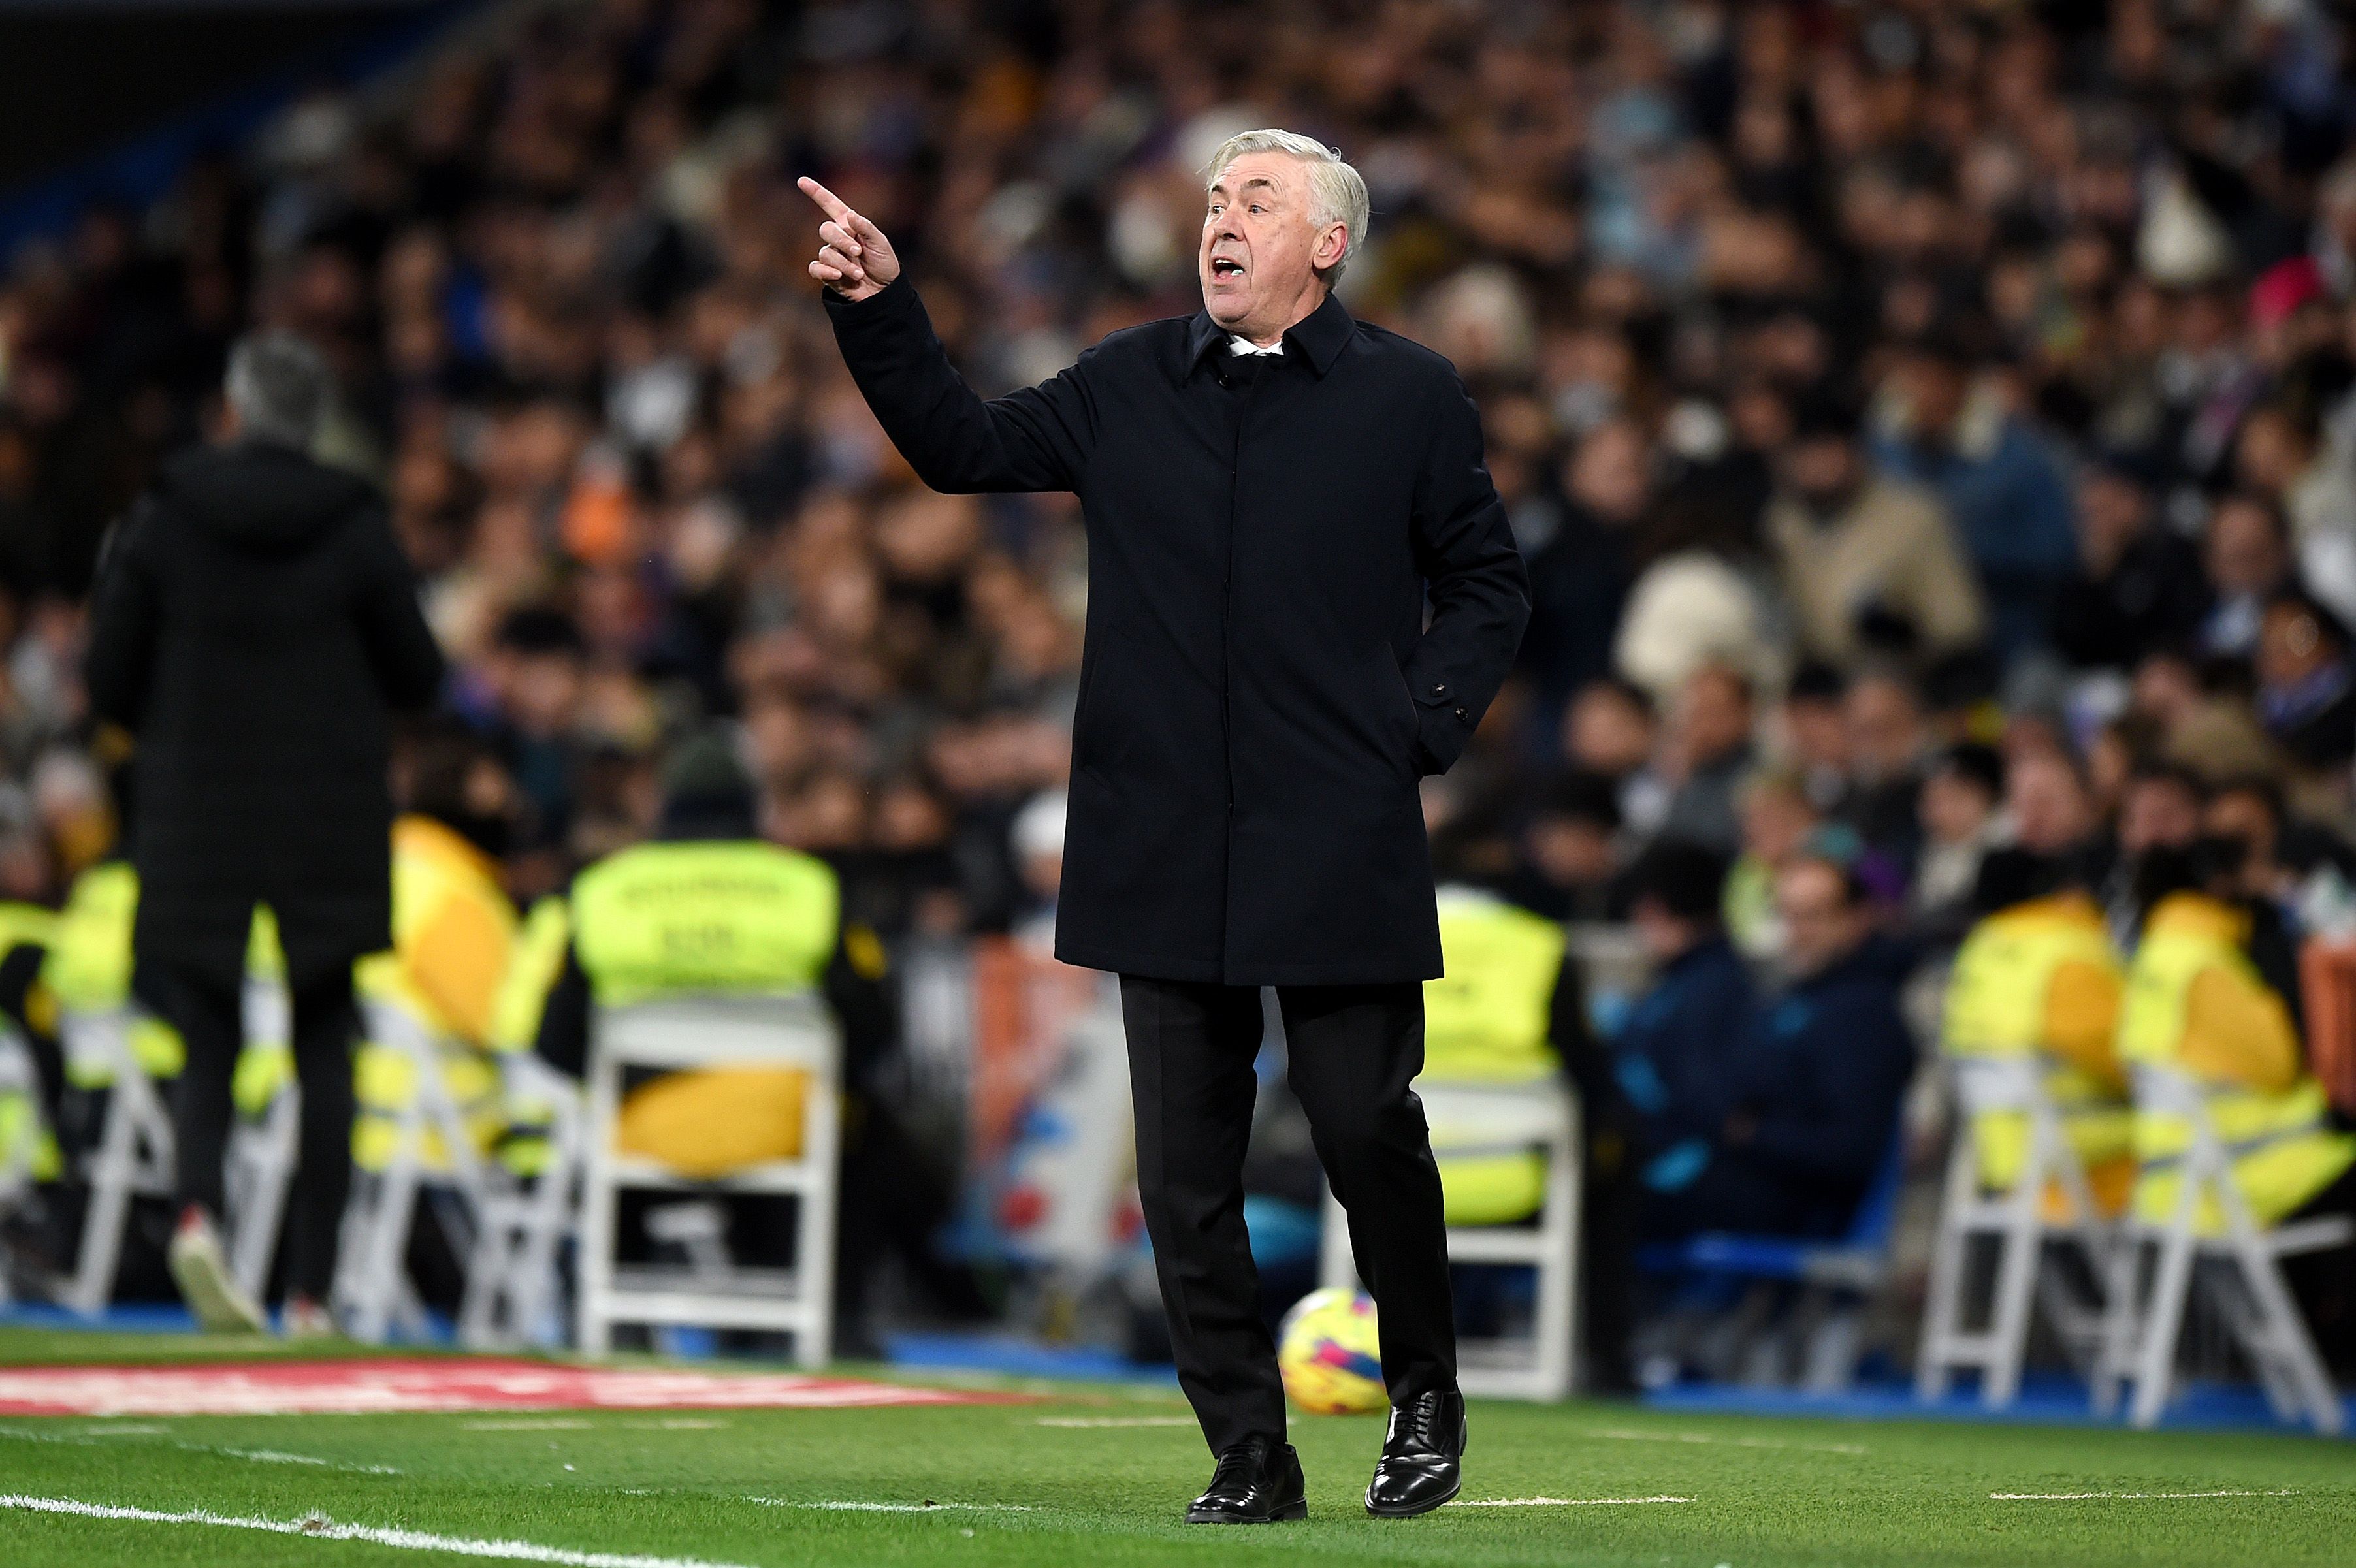 Carlo Ancelotti of Real Madrid gestures from the touchline